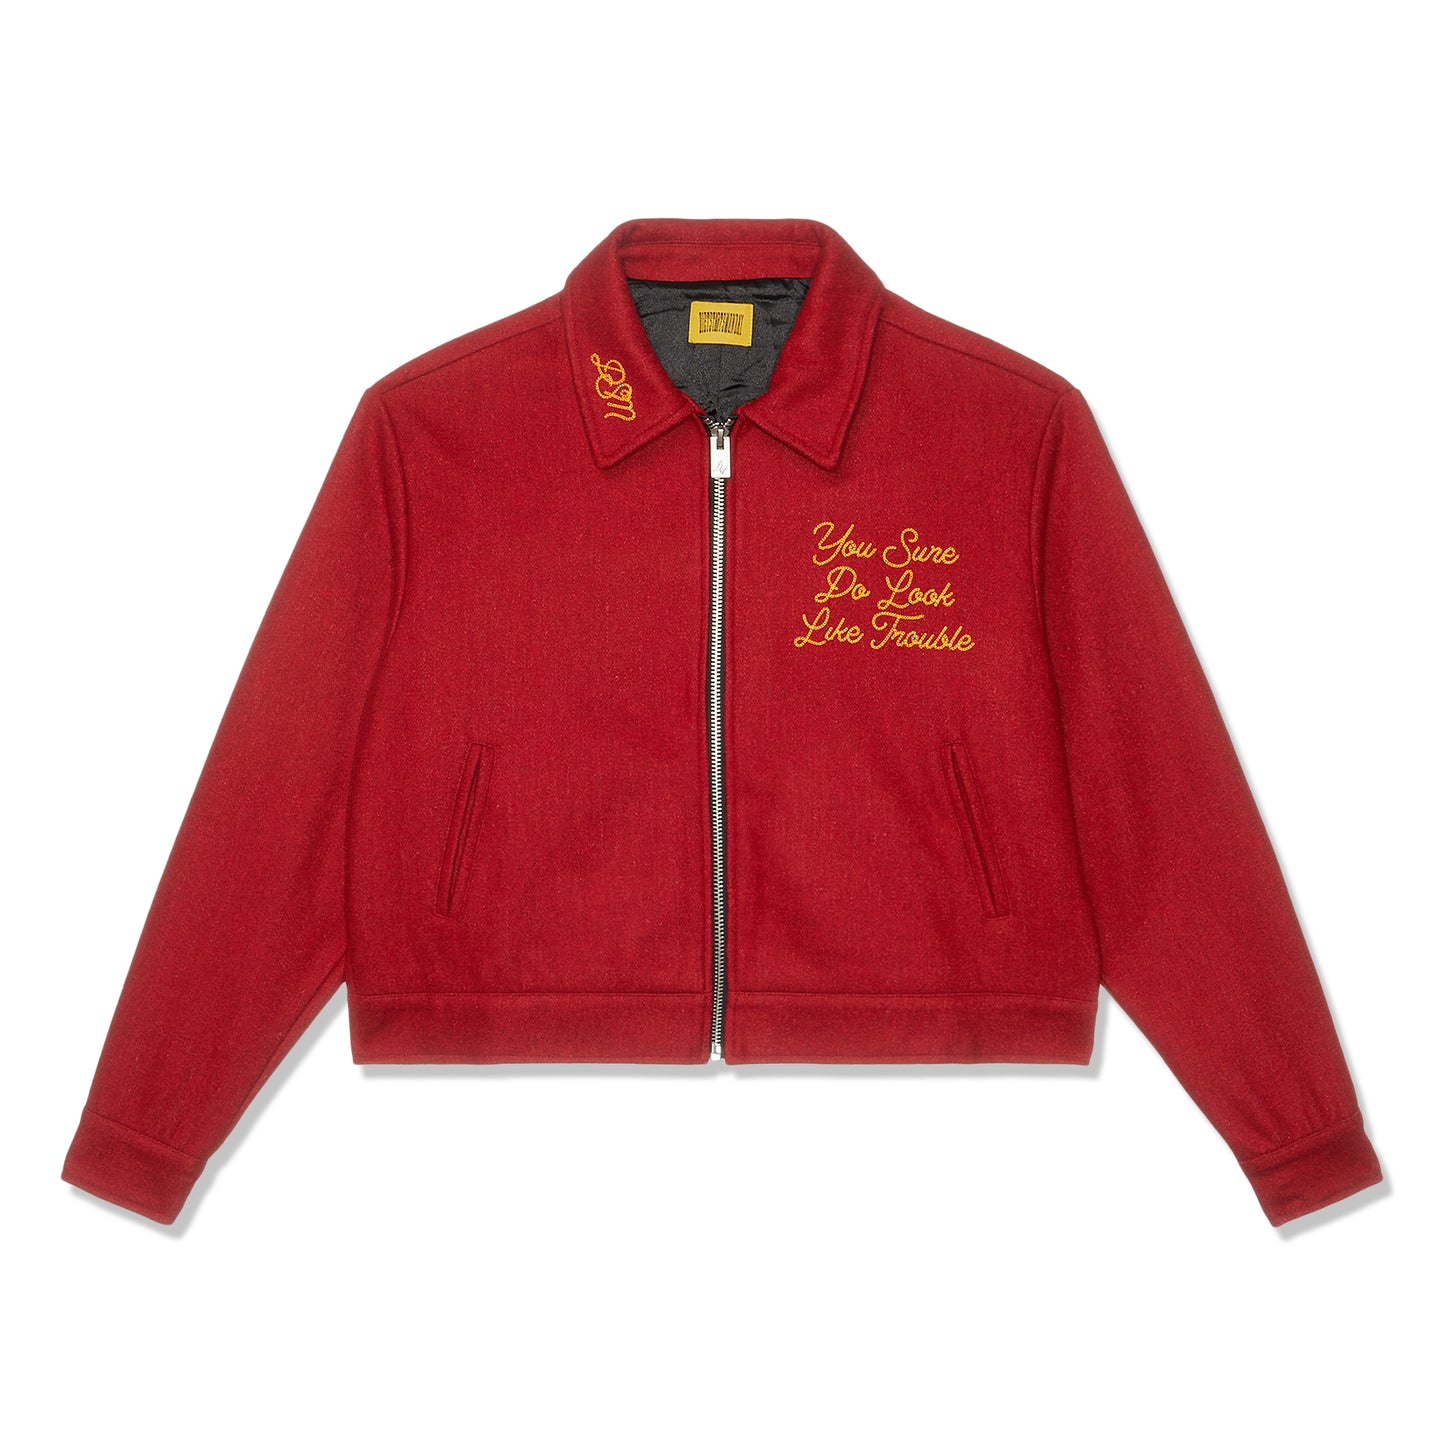 Diet Starts Monday Trouble Jacket (Red)